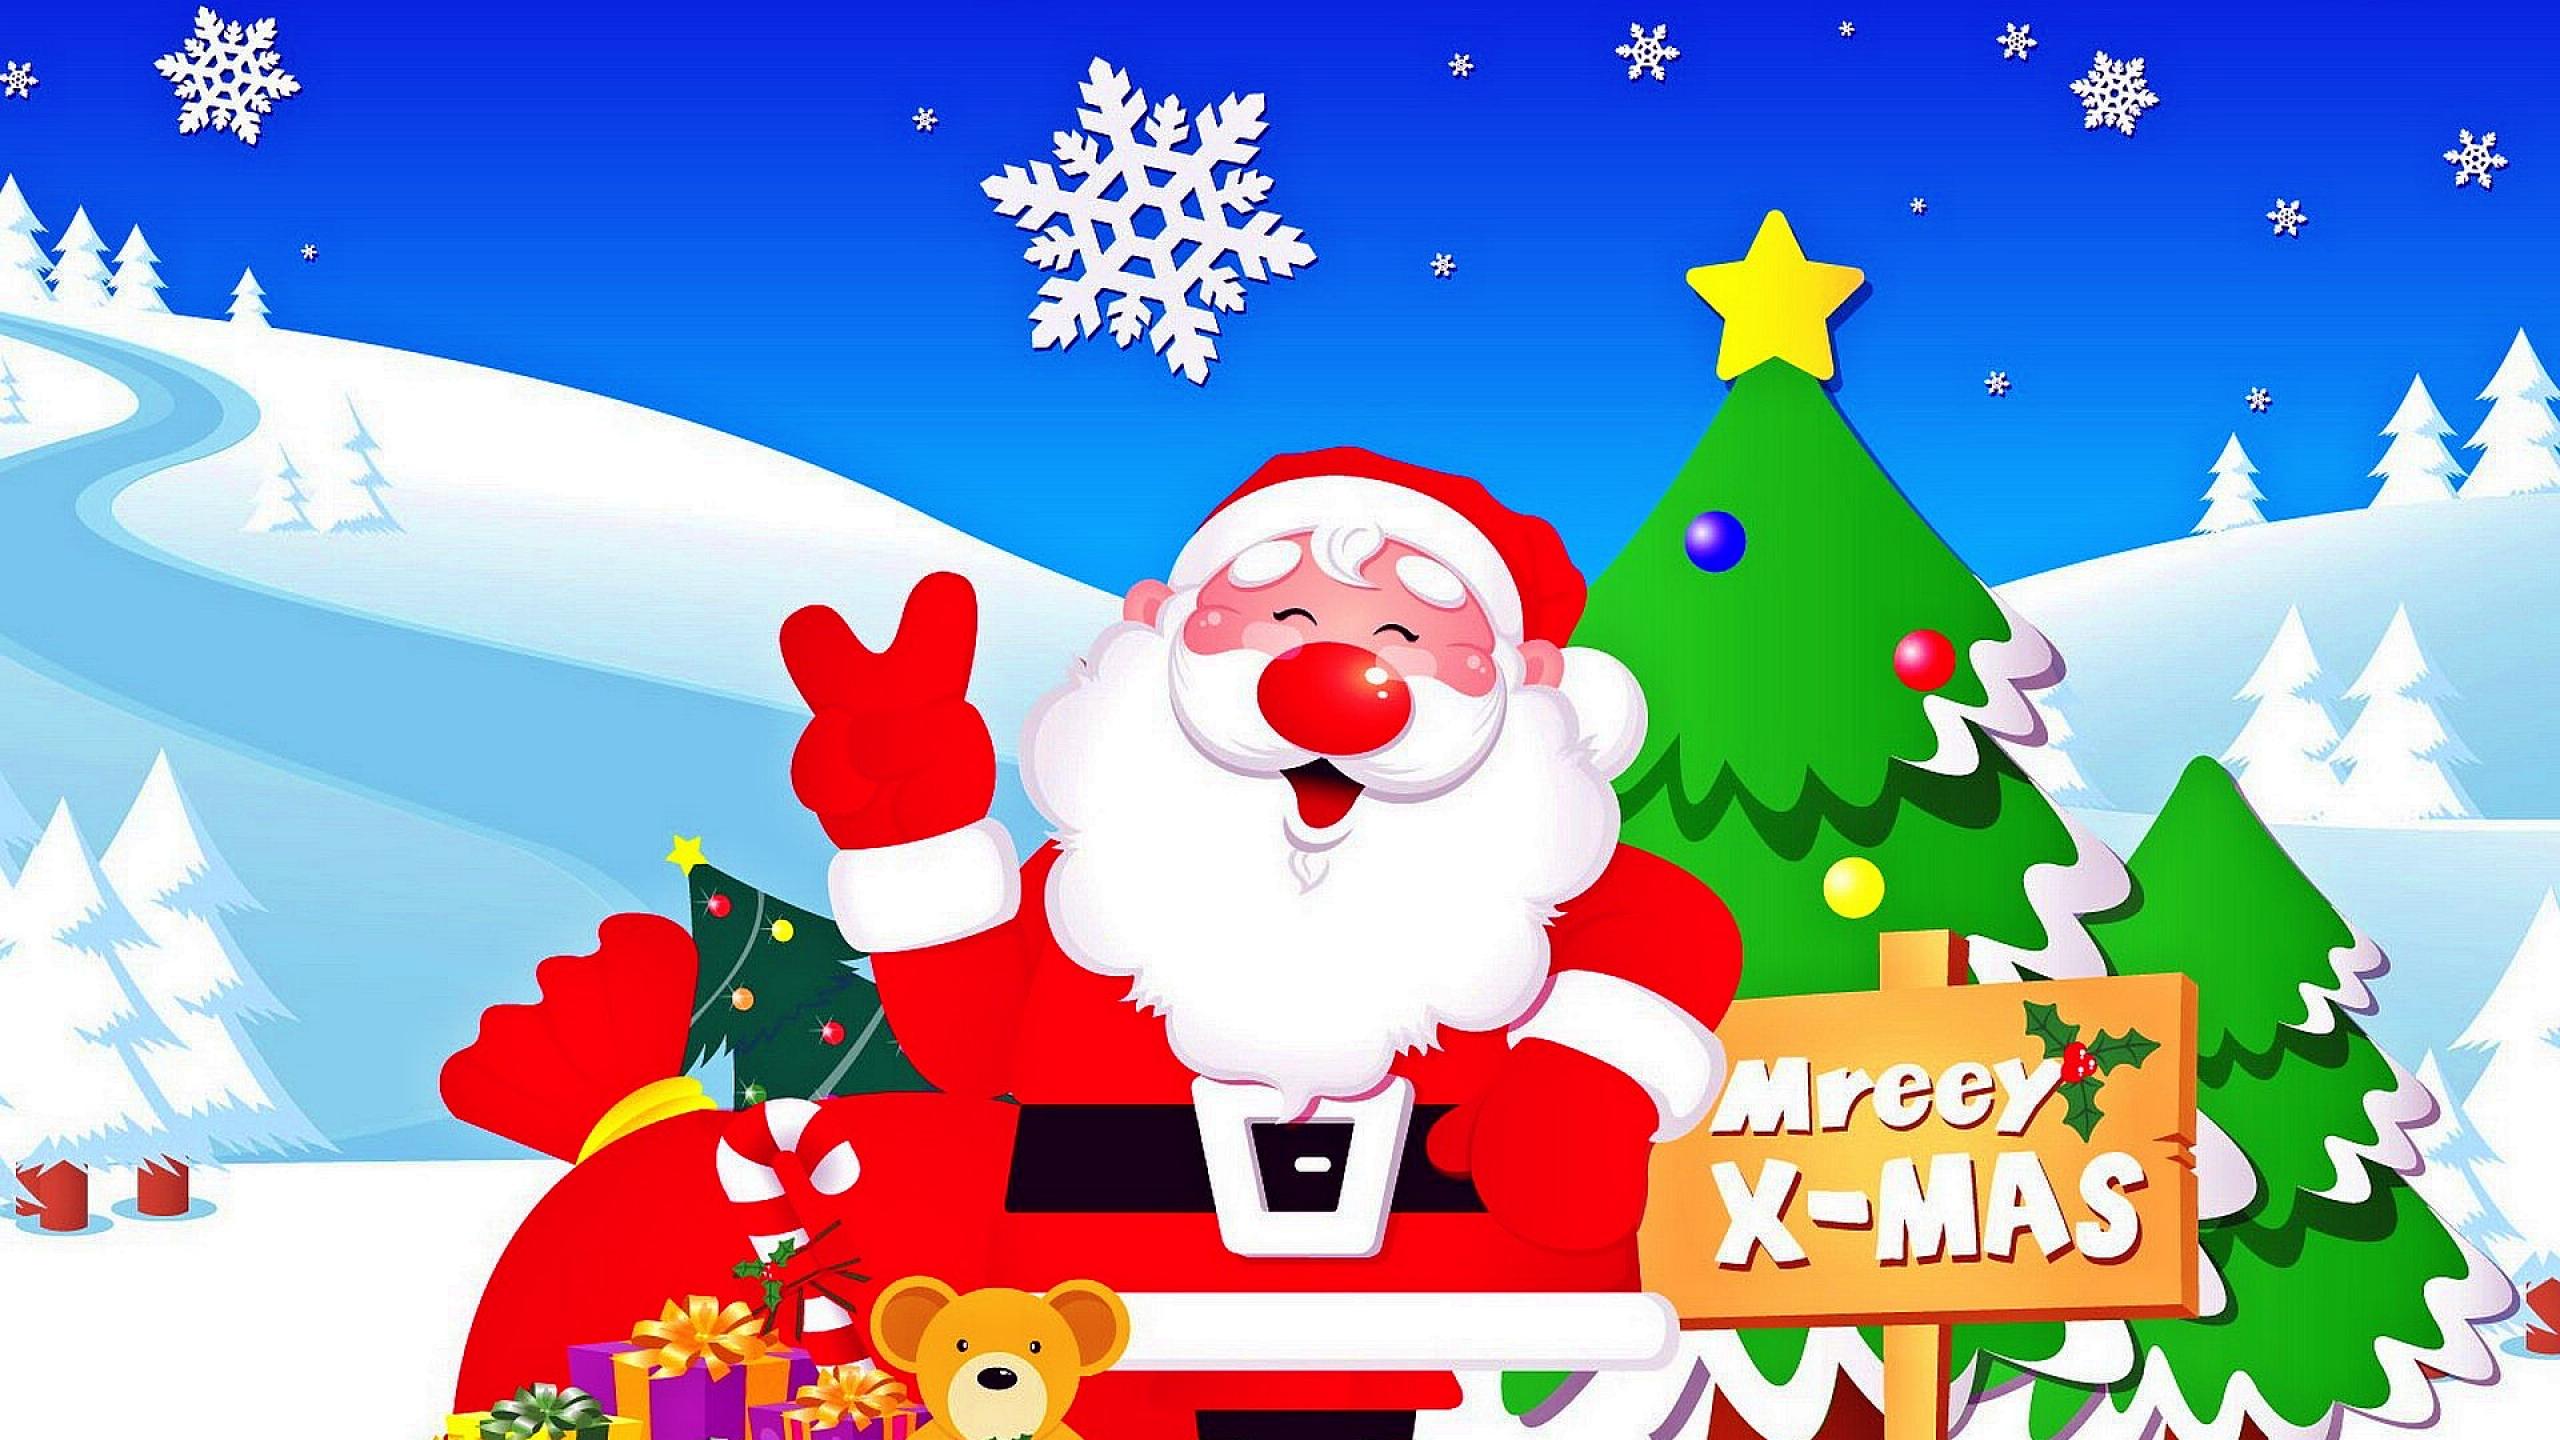 Free Download Cute Christmas Wallpapers 2560x1440